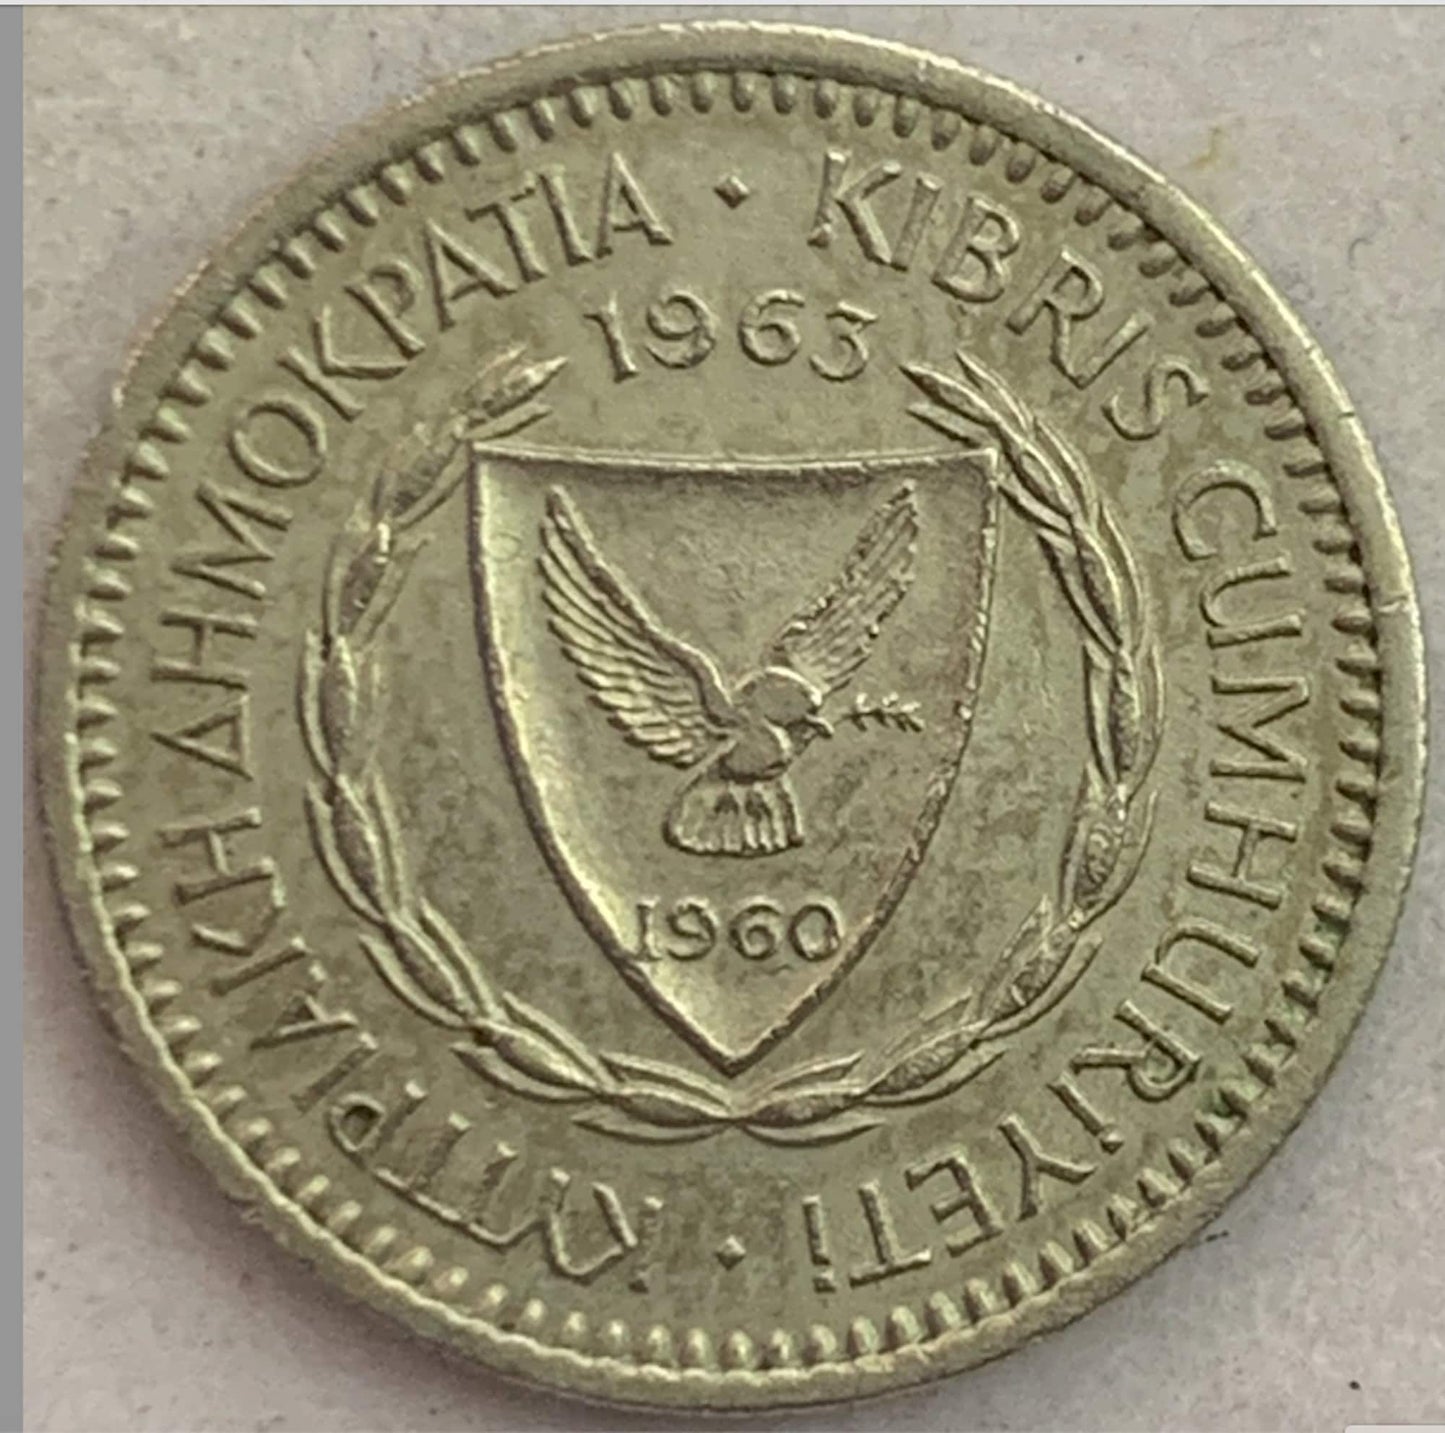 Collectible Treasure: Vintage Cyprus 25 Mils Coin, Limited Edition from 1955"